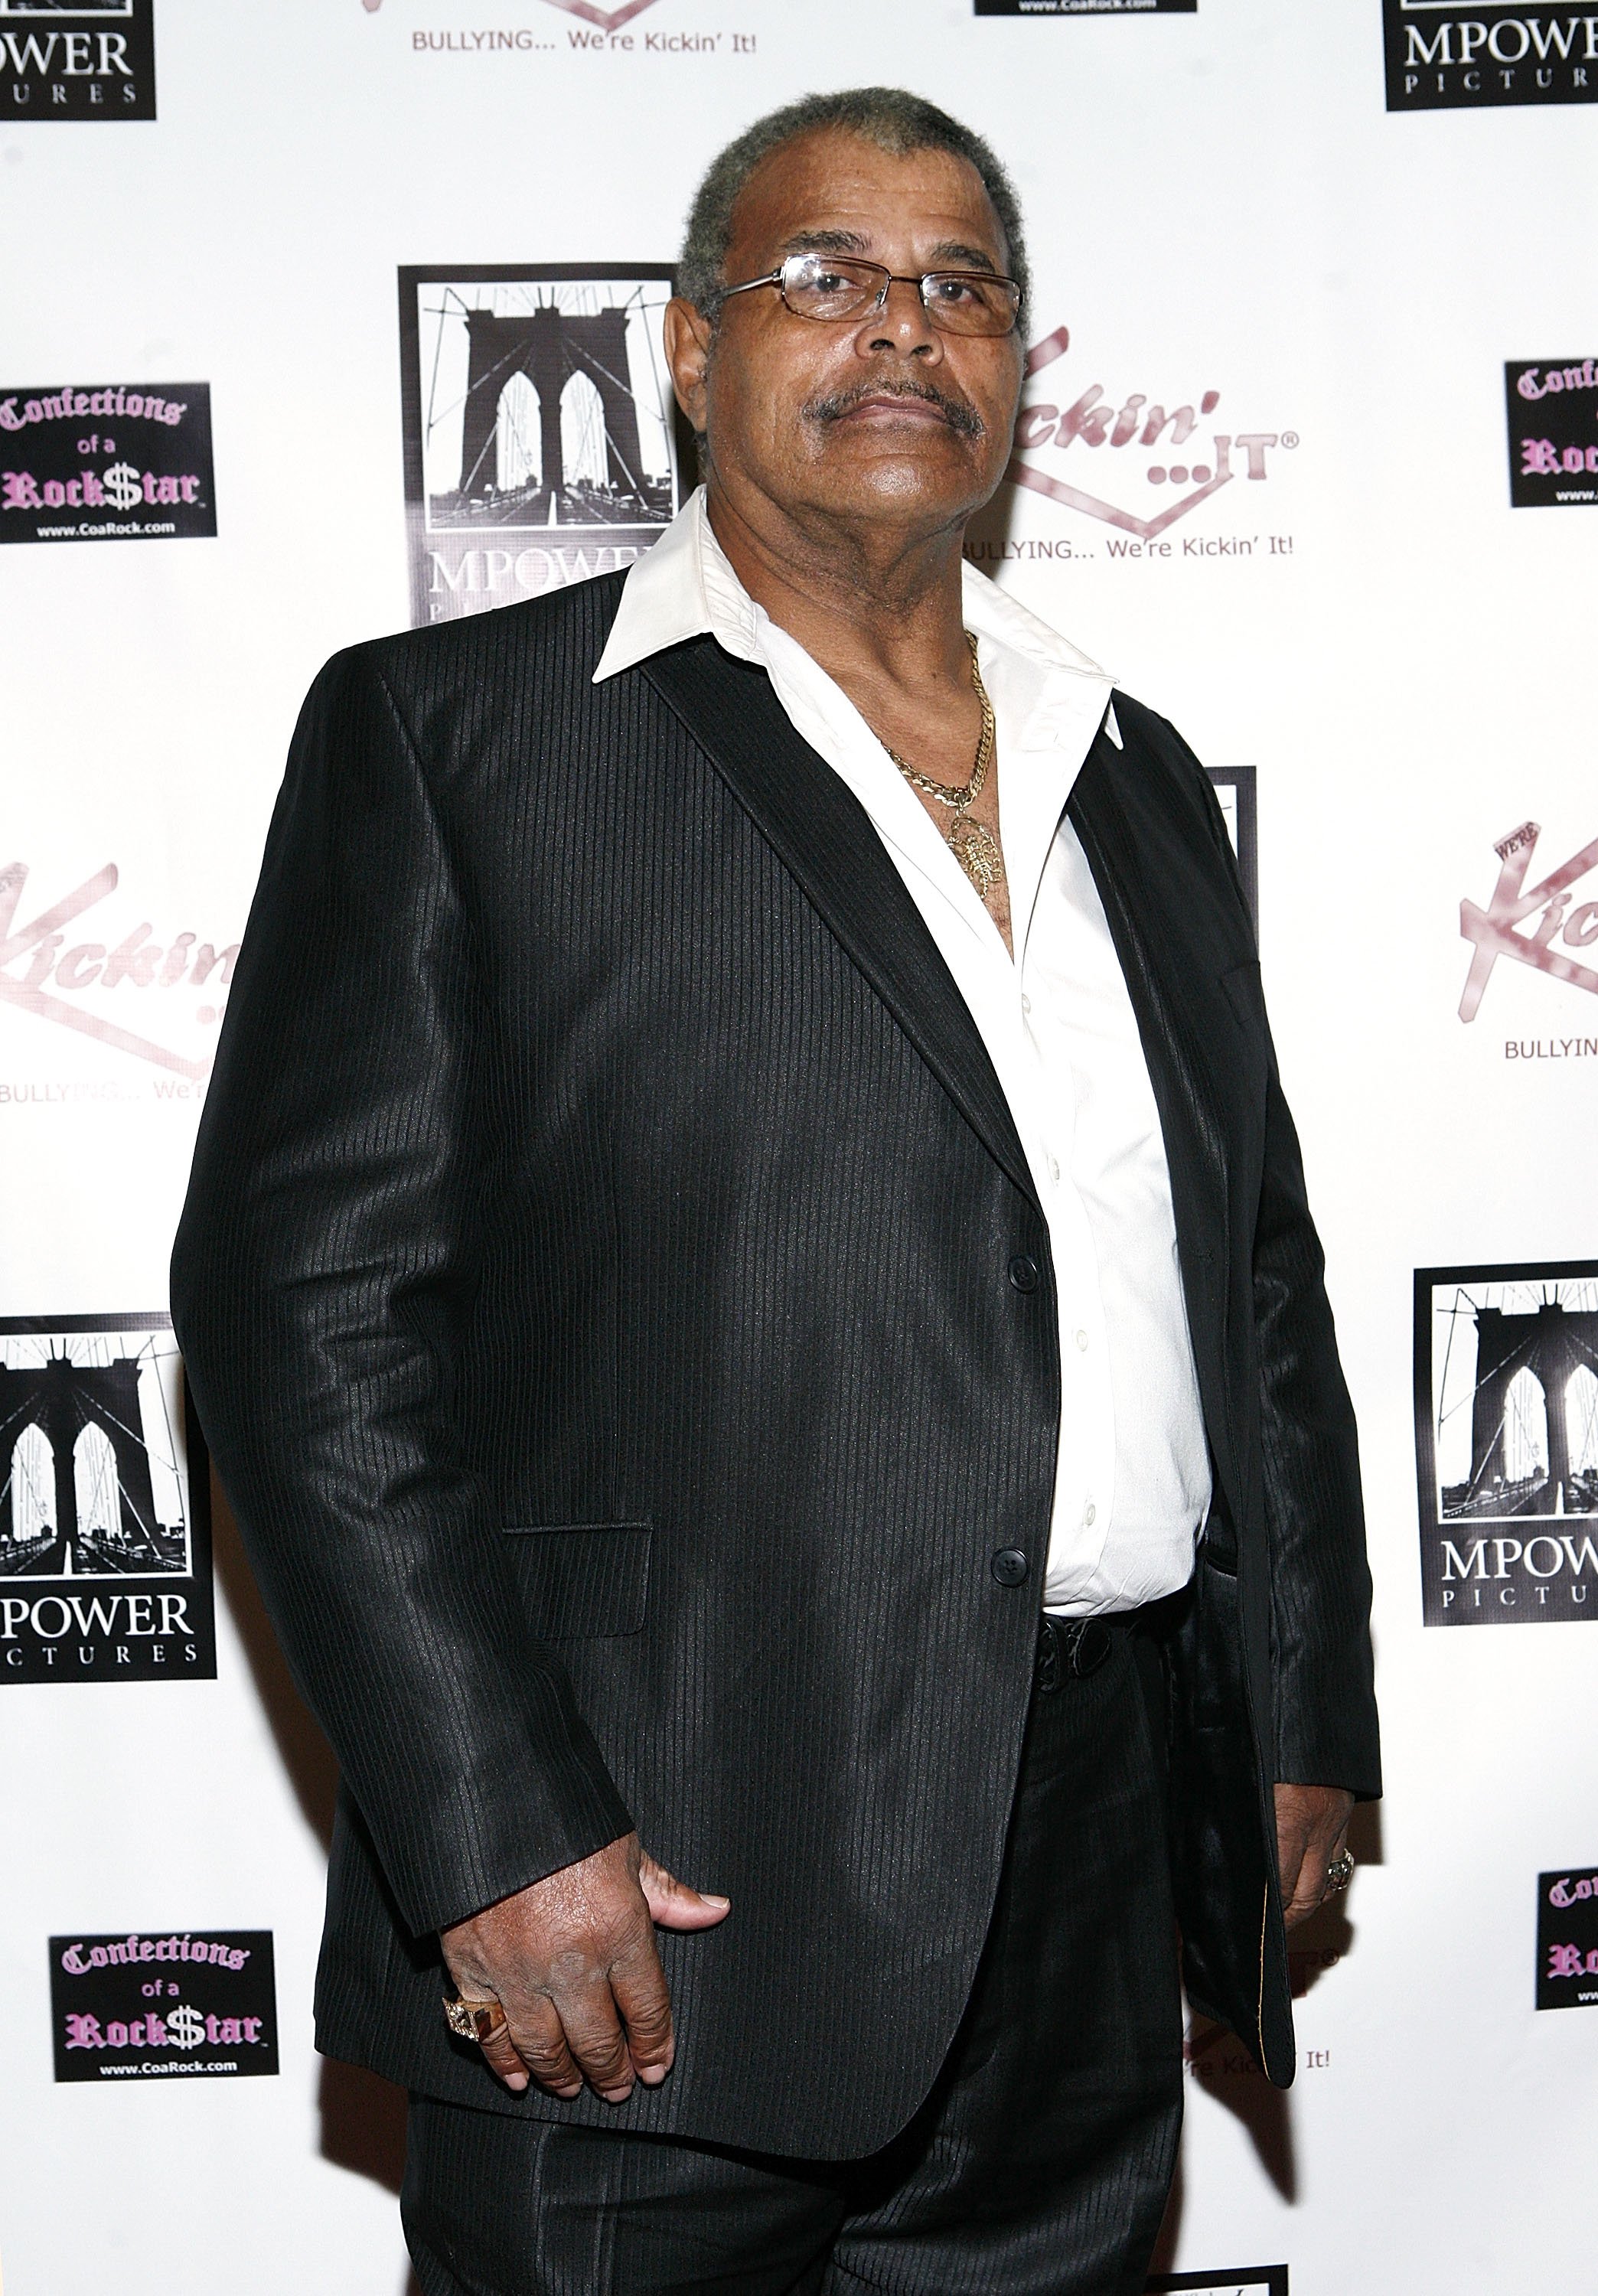  Rocky Johnson attends Unite in the Fight... to Knockout Bullying at the Hard Rock Cafe New York on October 20, 2011 | Photo: Getty Images